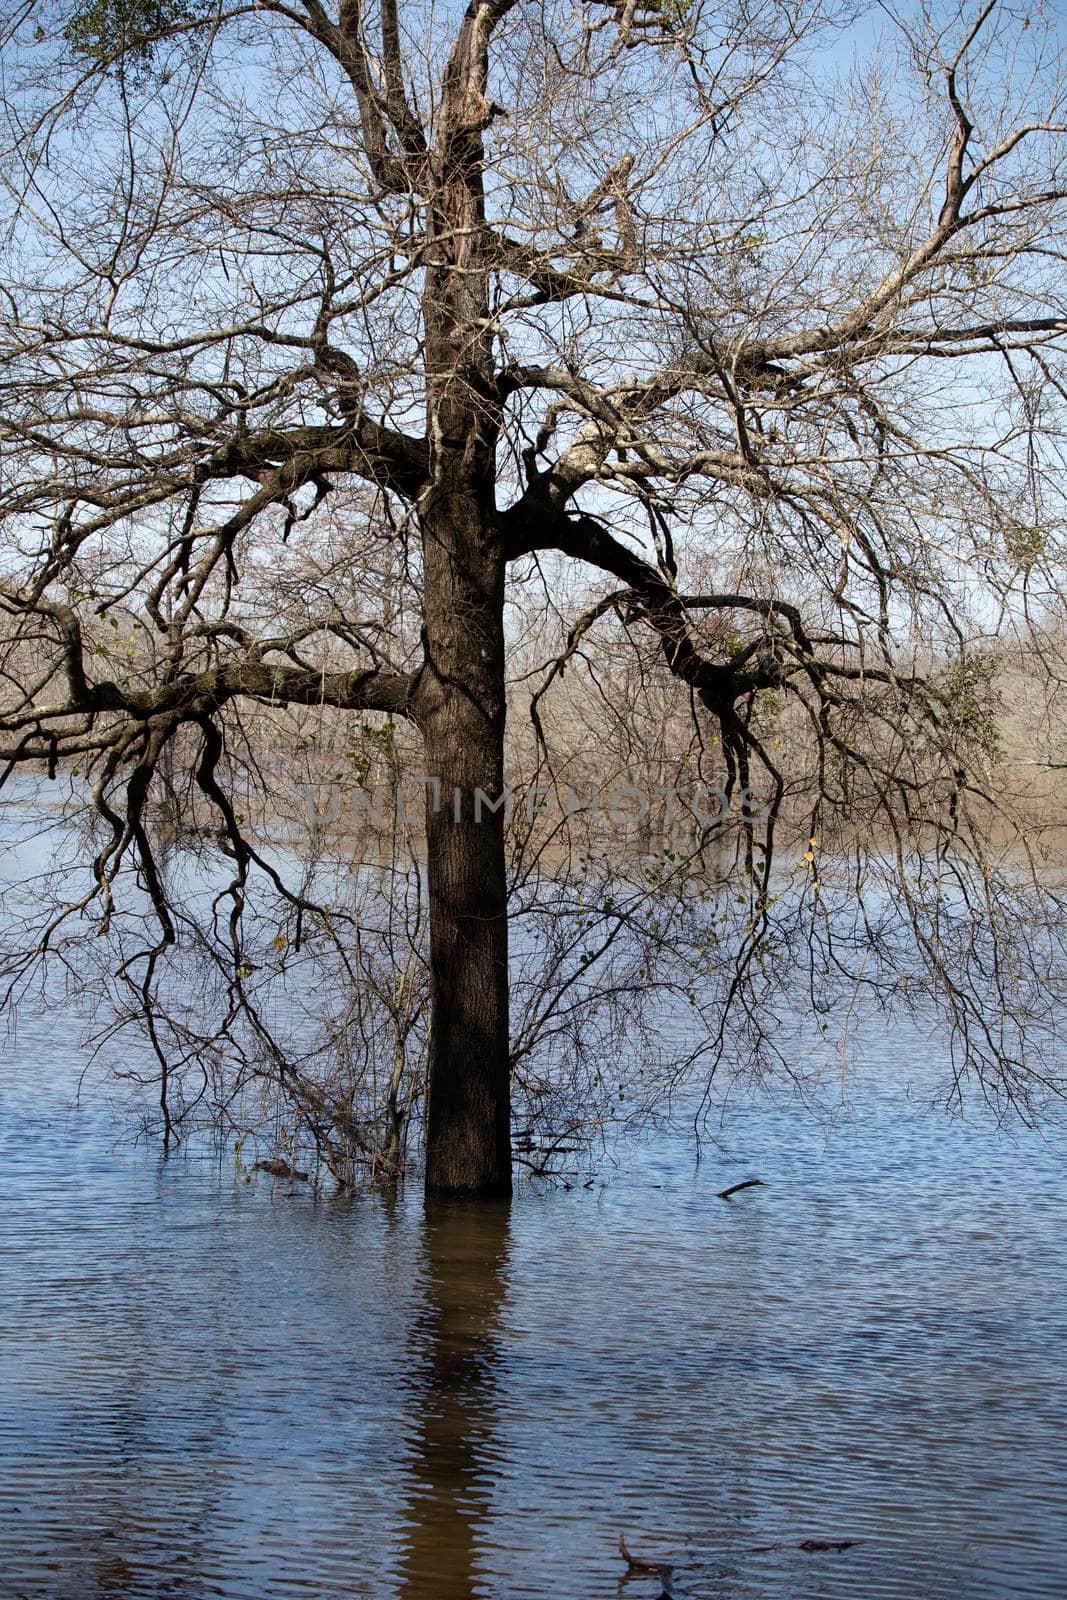 Single tree growing in shallow waters of a lake